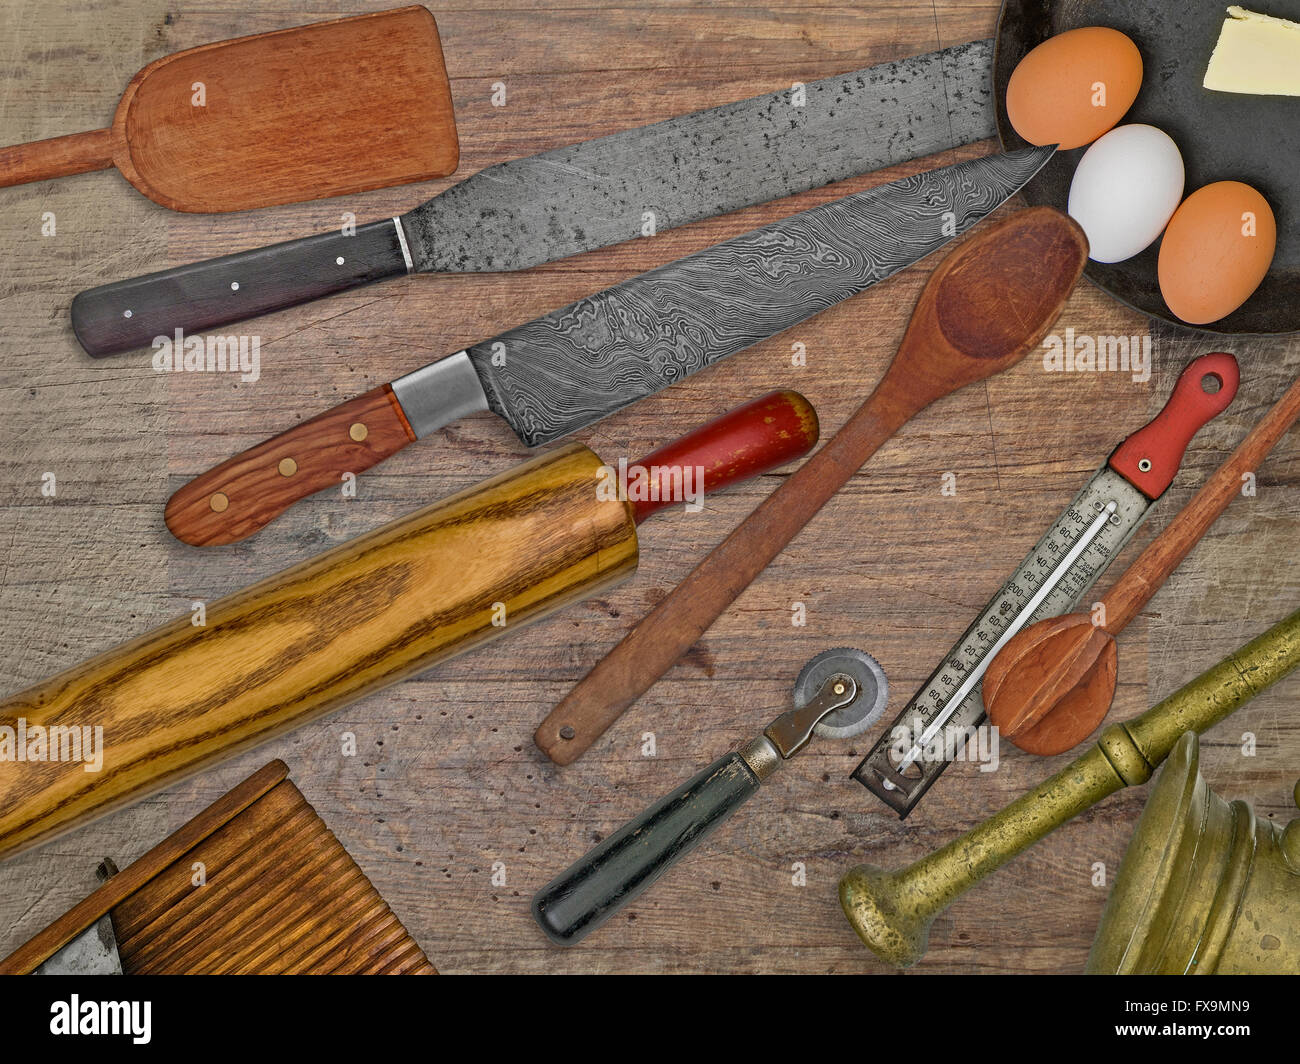 vintage bakery shop tools and utensils over stained wooden table Stock Photo